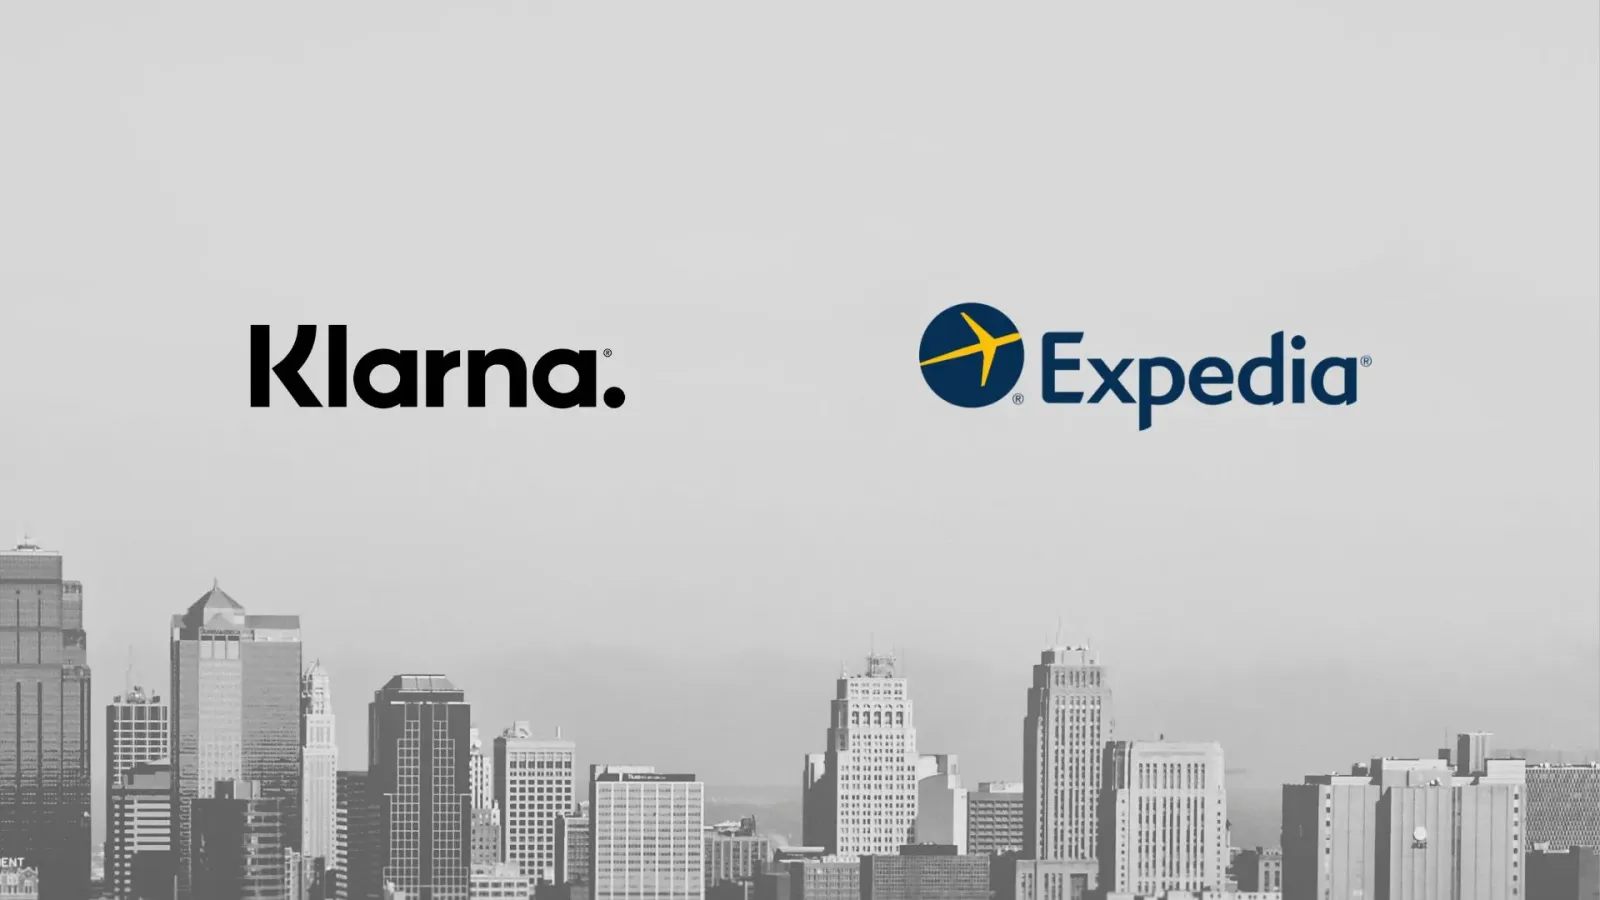 Klarna And Expedia Boost US Travel With AI-Driven Payment Options